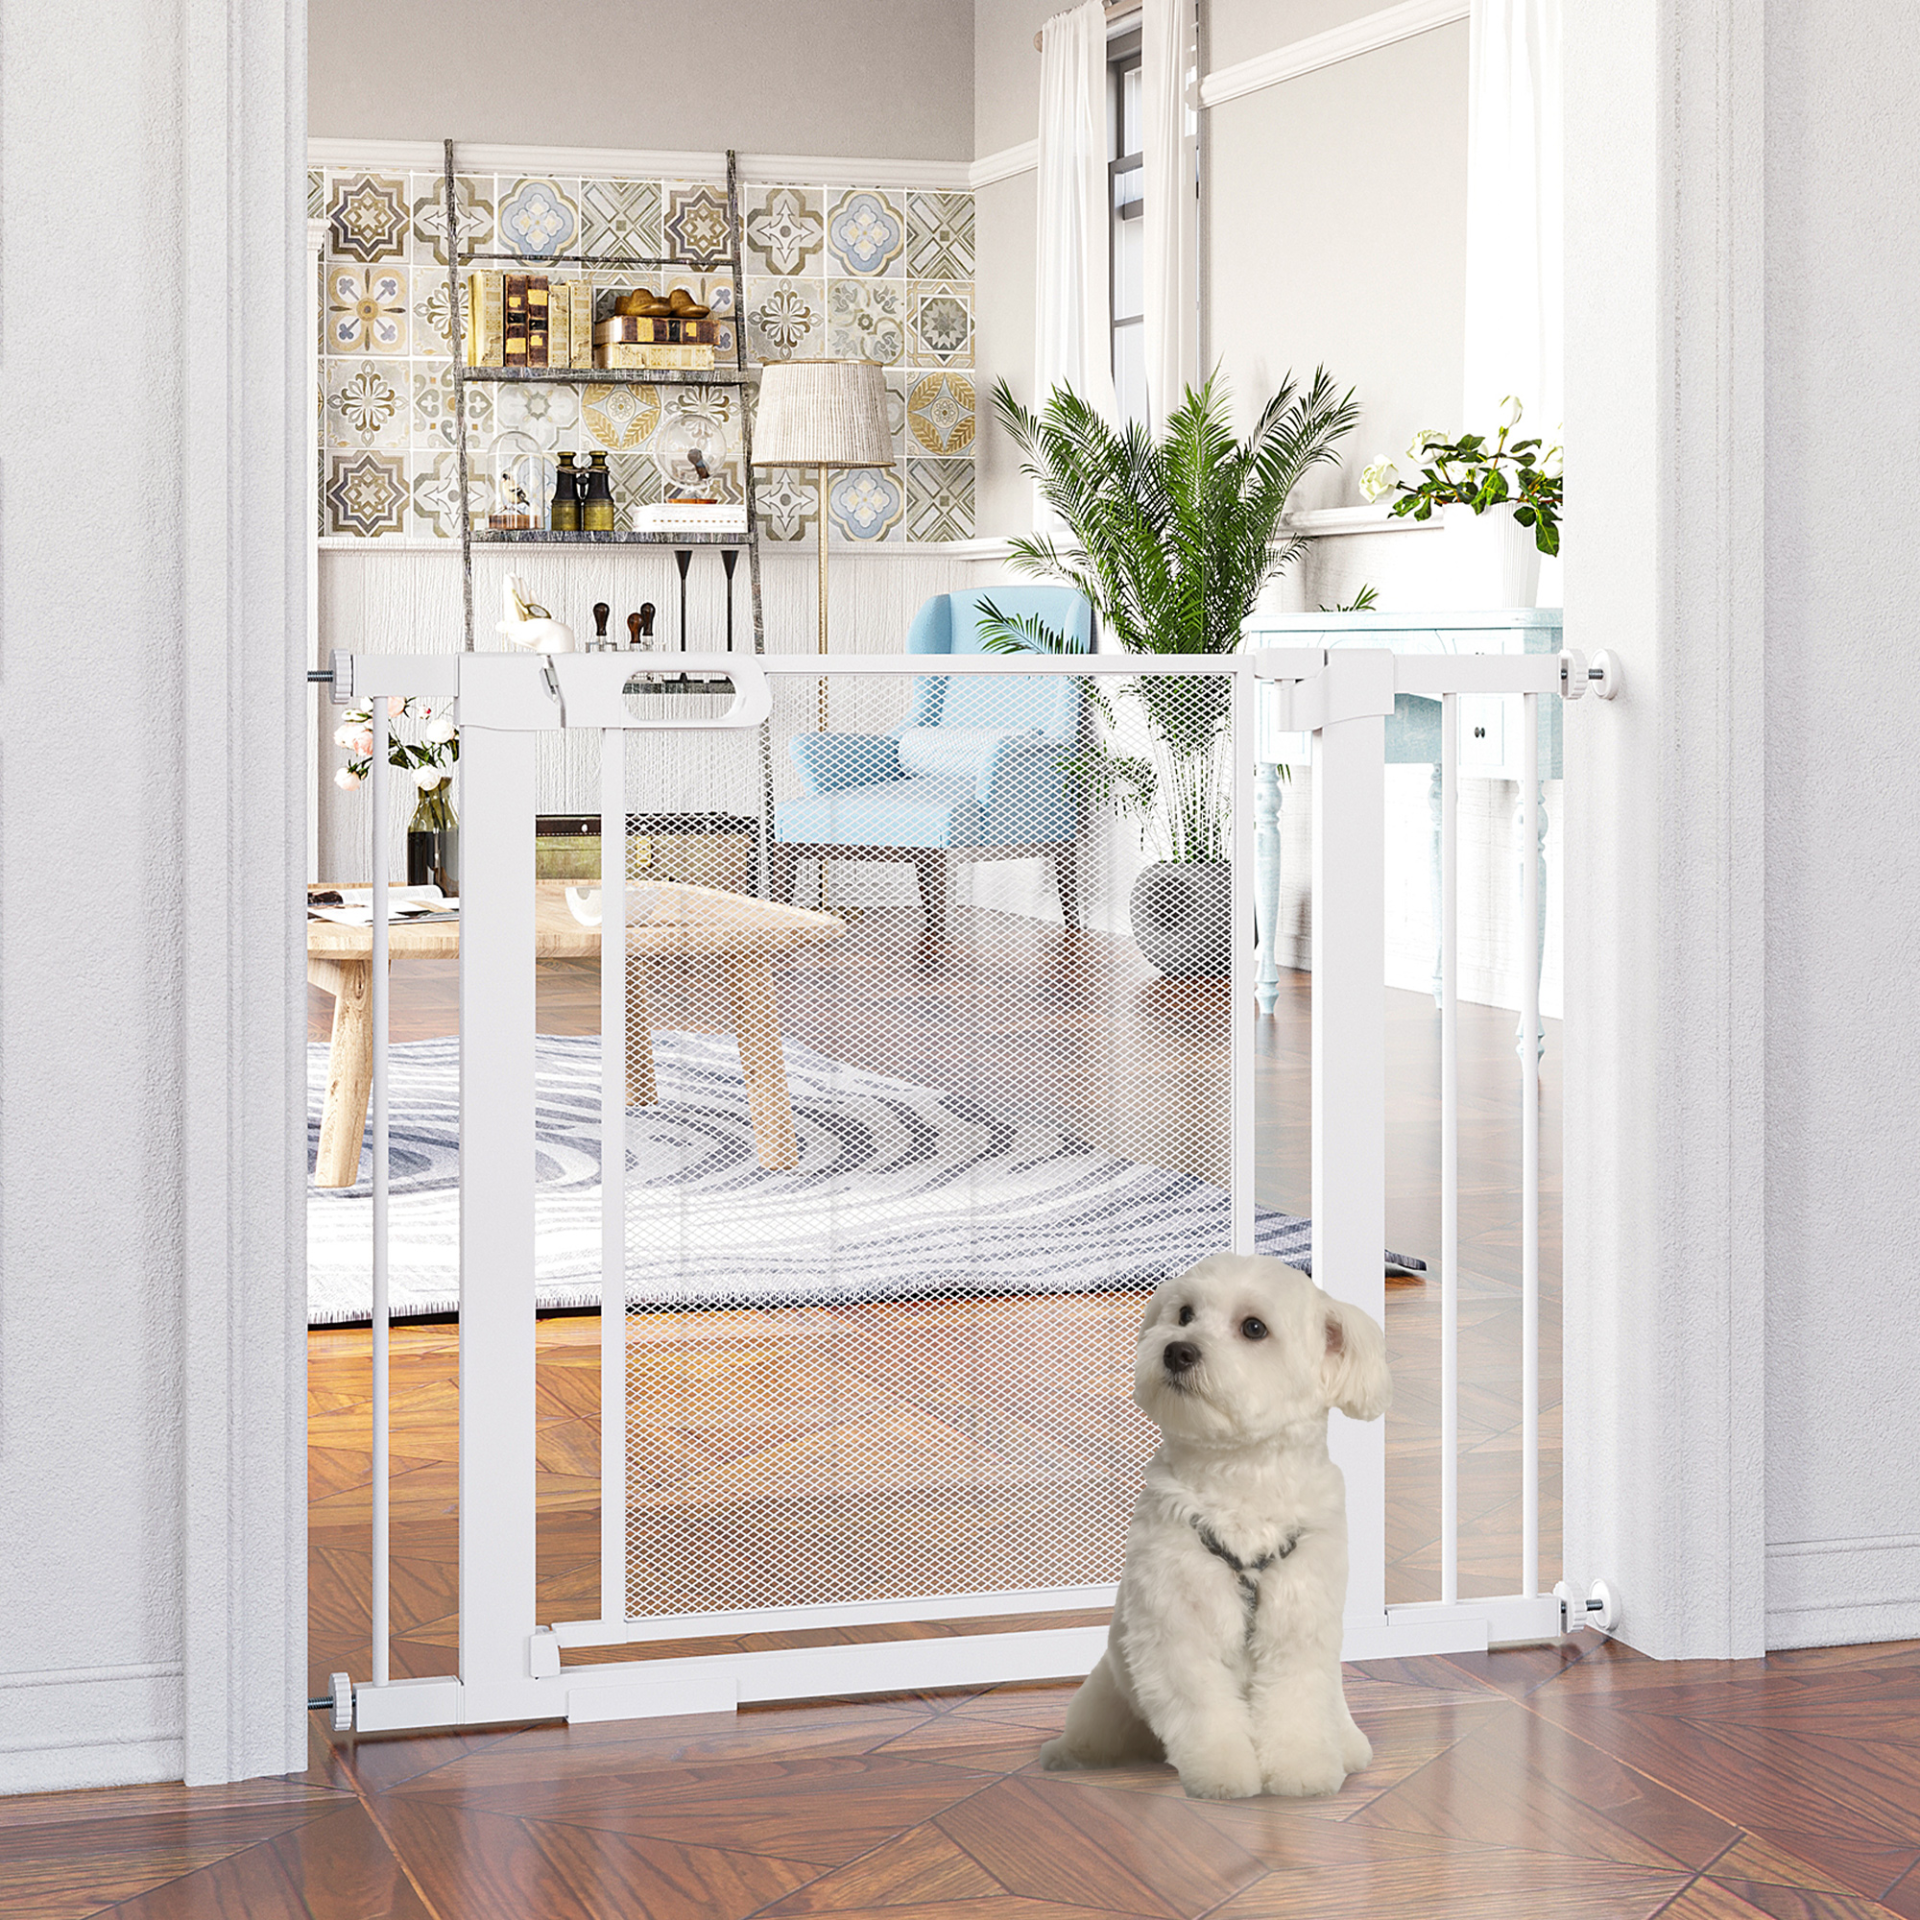 PawHut Pressure Fit Safety Gate for Doorways and Staircases, Dog Gate w/ Auto Closing Door, Pet Barrier for Hallways w/ Double Locking, Openings 75-103CM - White